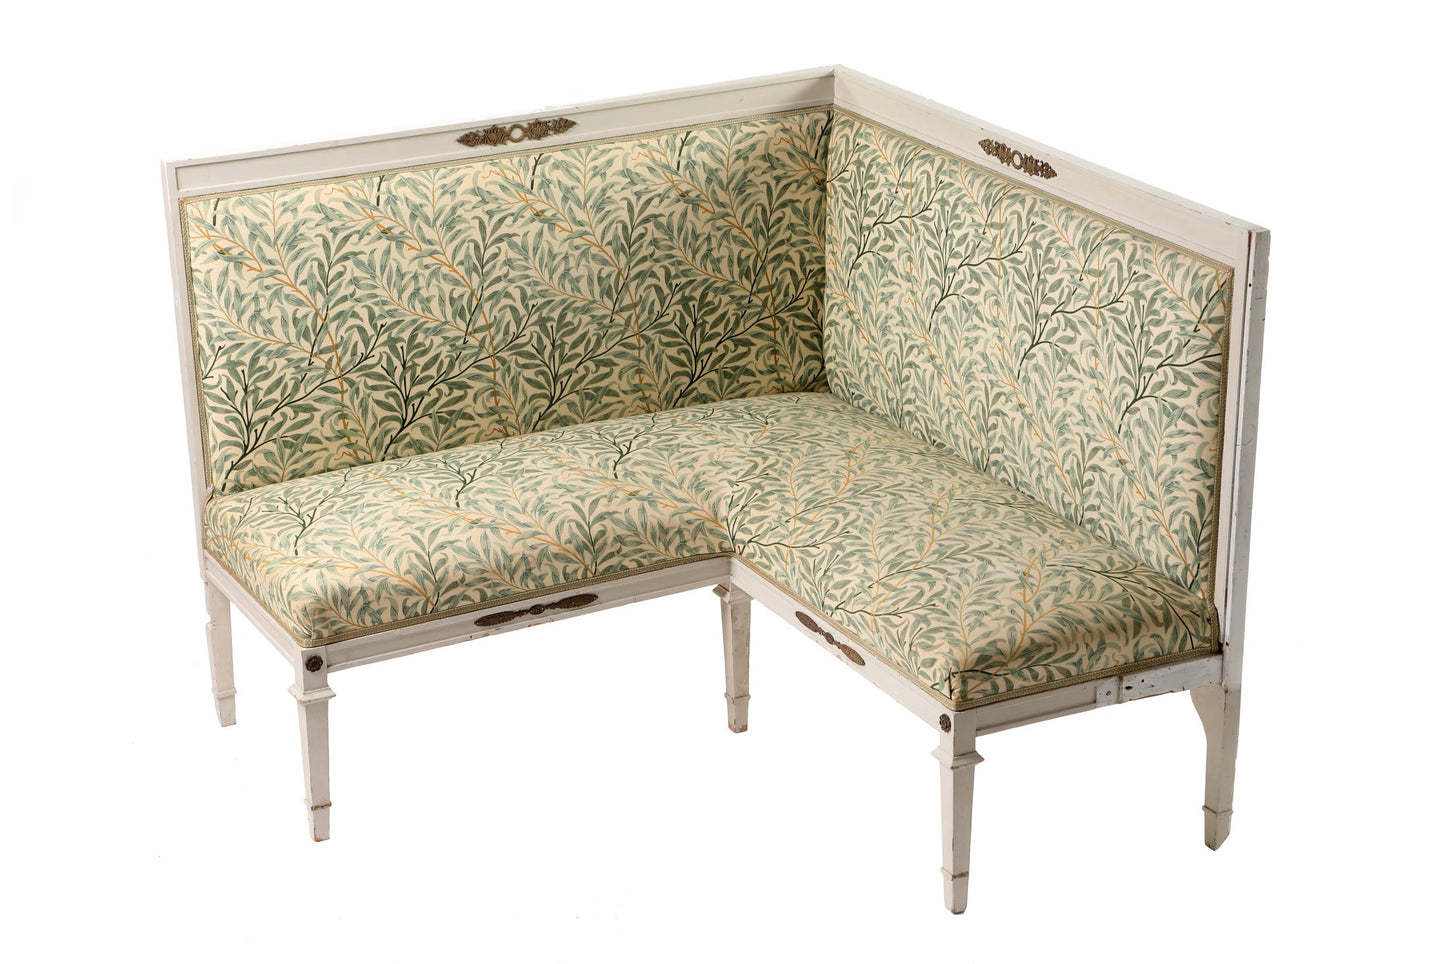 Ivory lacquered corner sofa from the 1950s